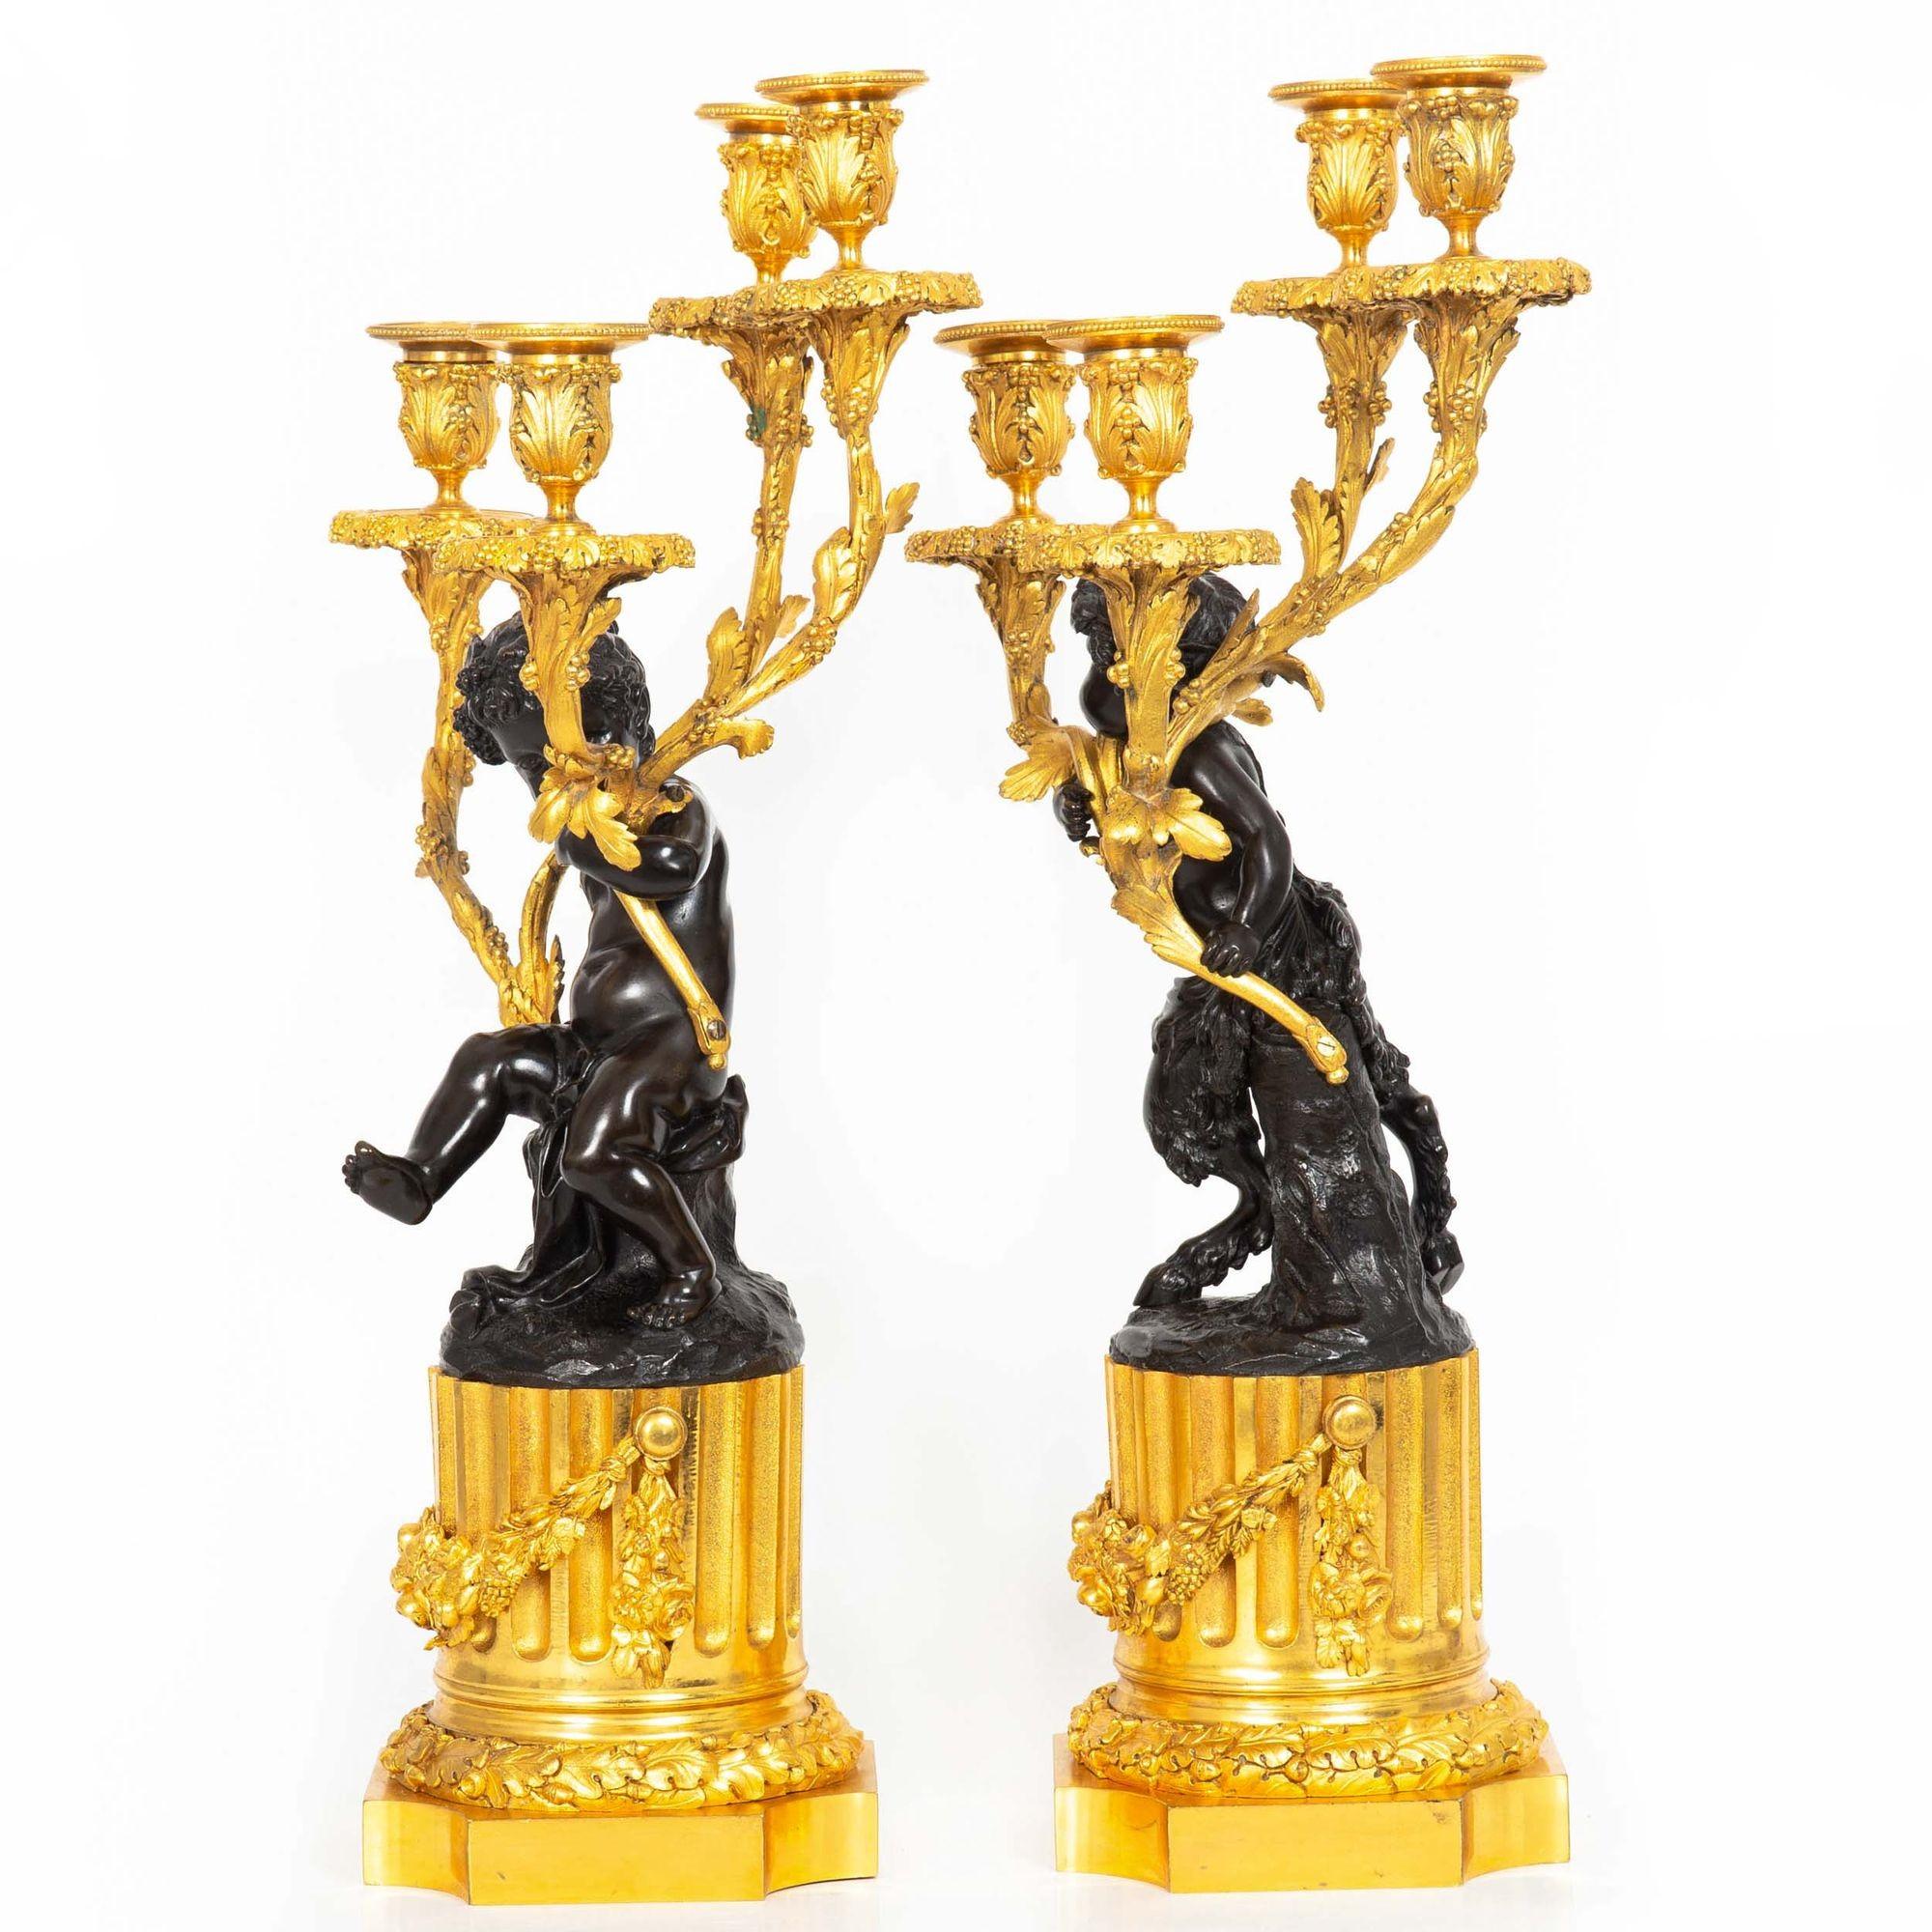 PAIR OF LOUIS XVI STYLE FOUR-LIGHT GILT AND PATINATED CANDELABRA OF YOUNG BACCHANTESSE & SATYR
After the models by Claude Michel, known as Clodion  France, circa 1870
Item # 403SAY11Z

A finely cast pair with brilliant gilding and great contrast